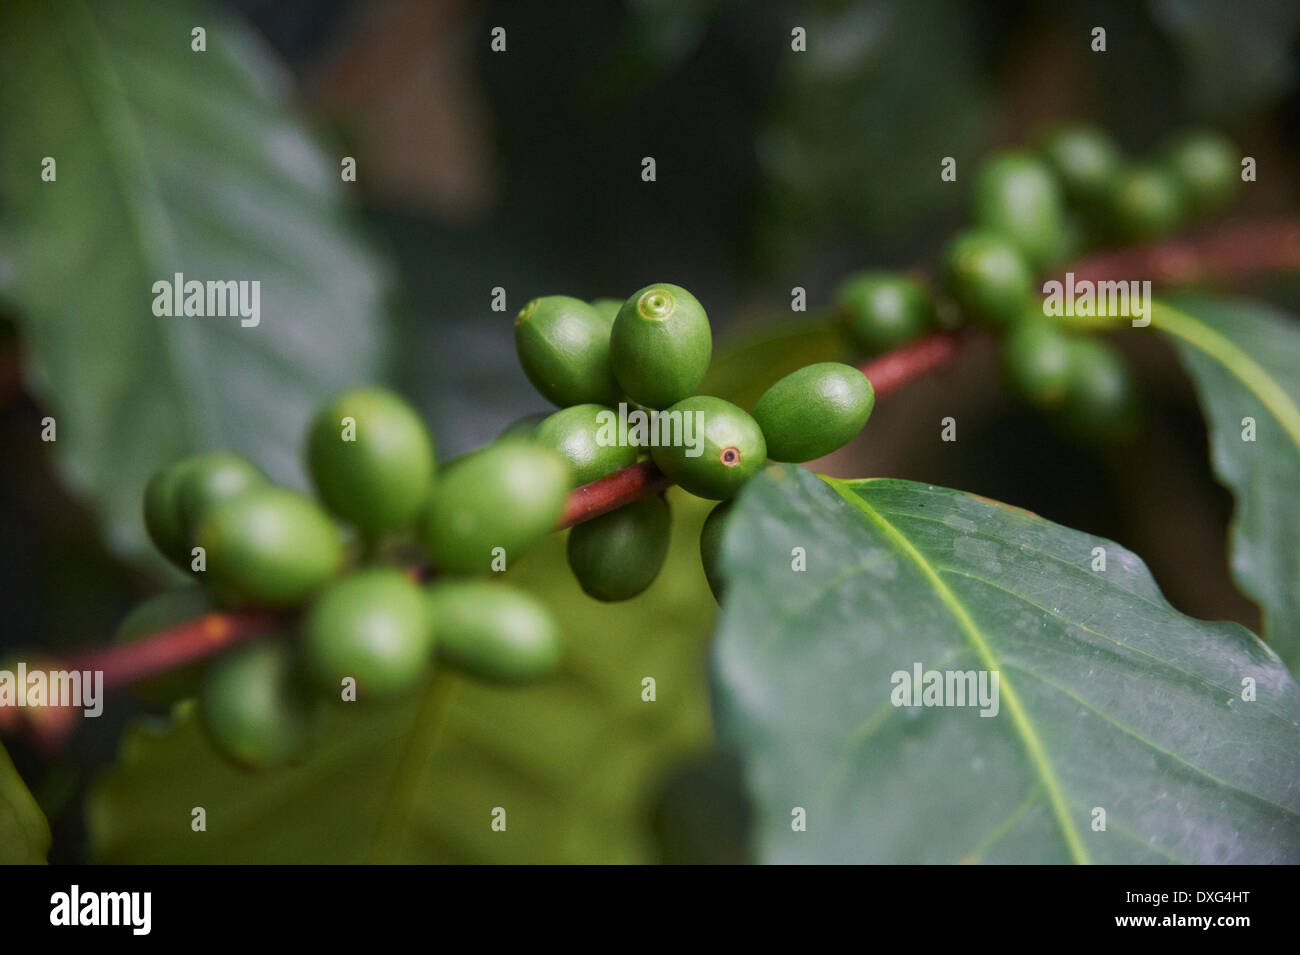 Close Up Of Coffee Beans Growing On Plant Stock Photo